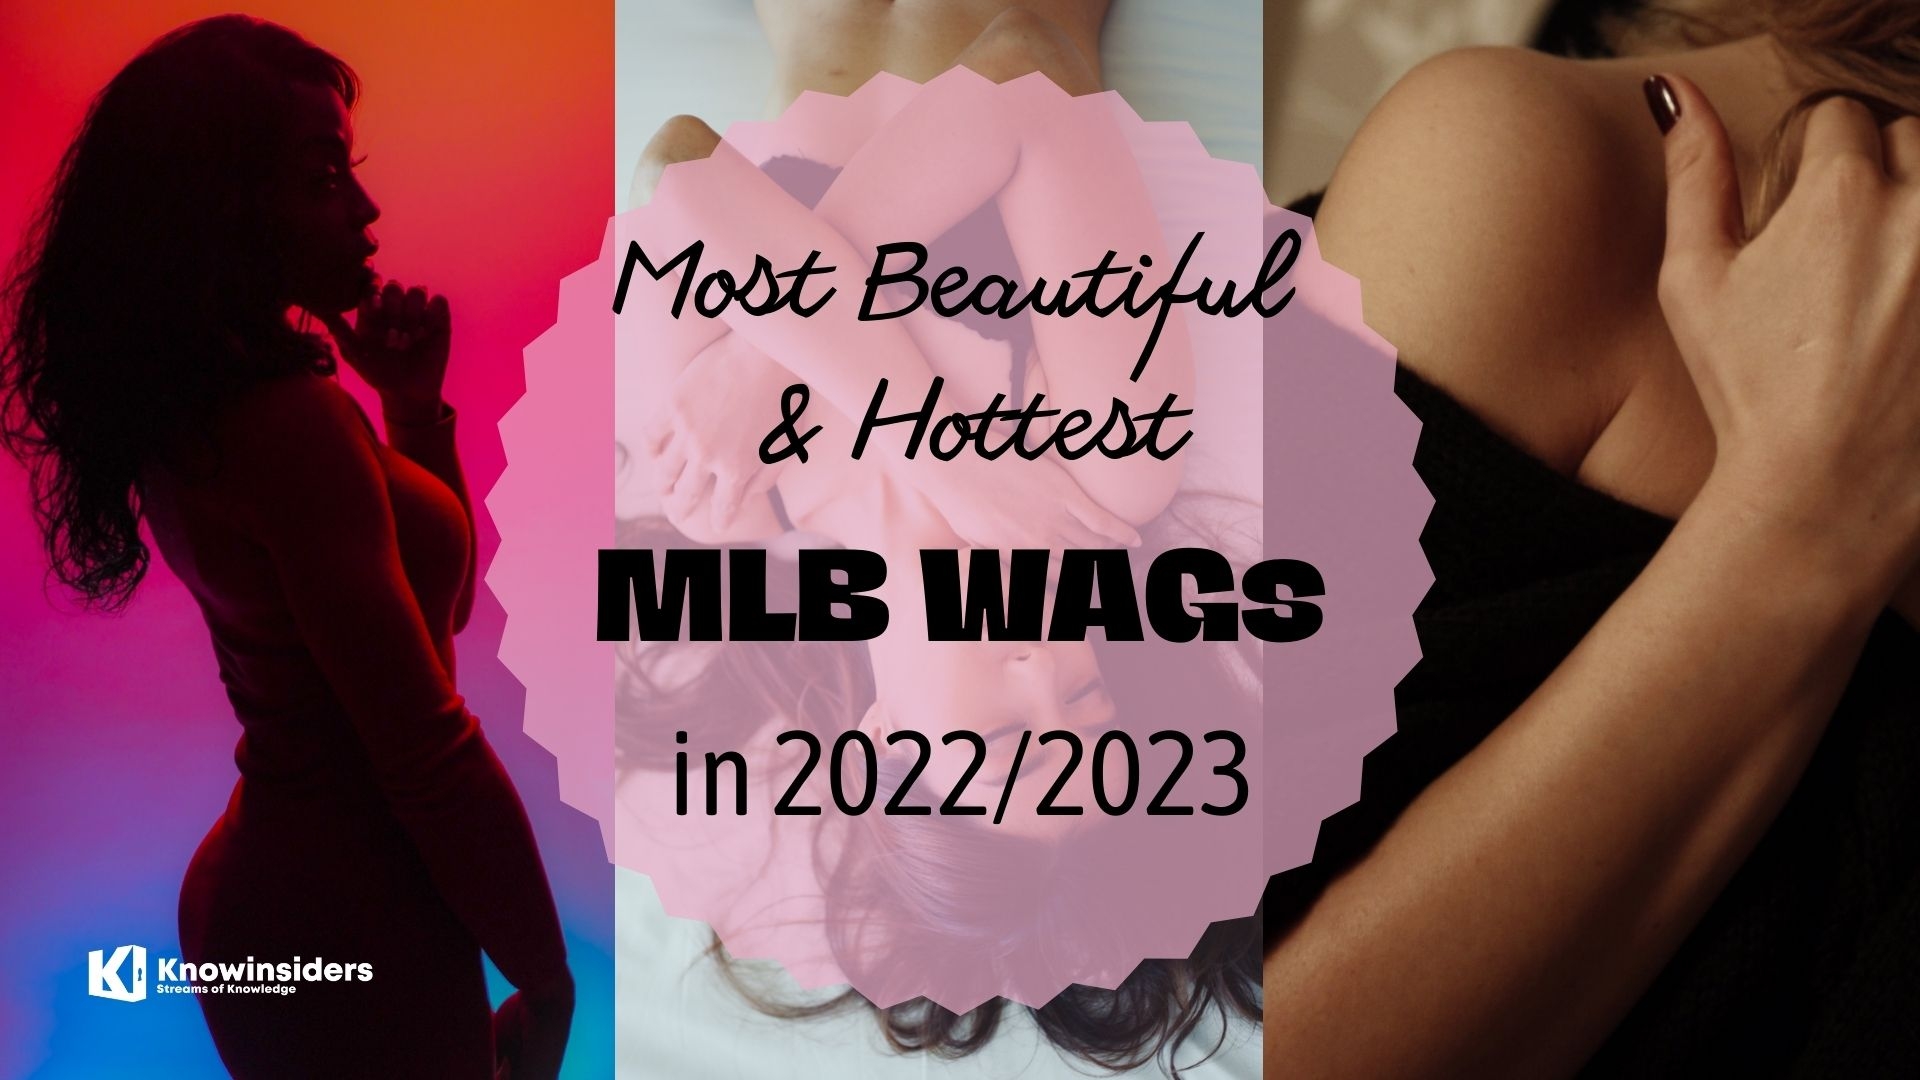 Top 10 Most Beautiful & Hottest MLB WAGs in 2022/2023